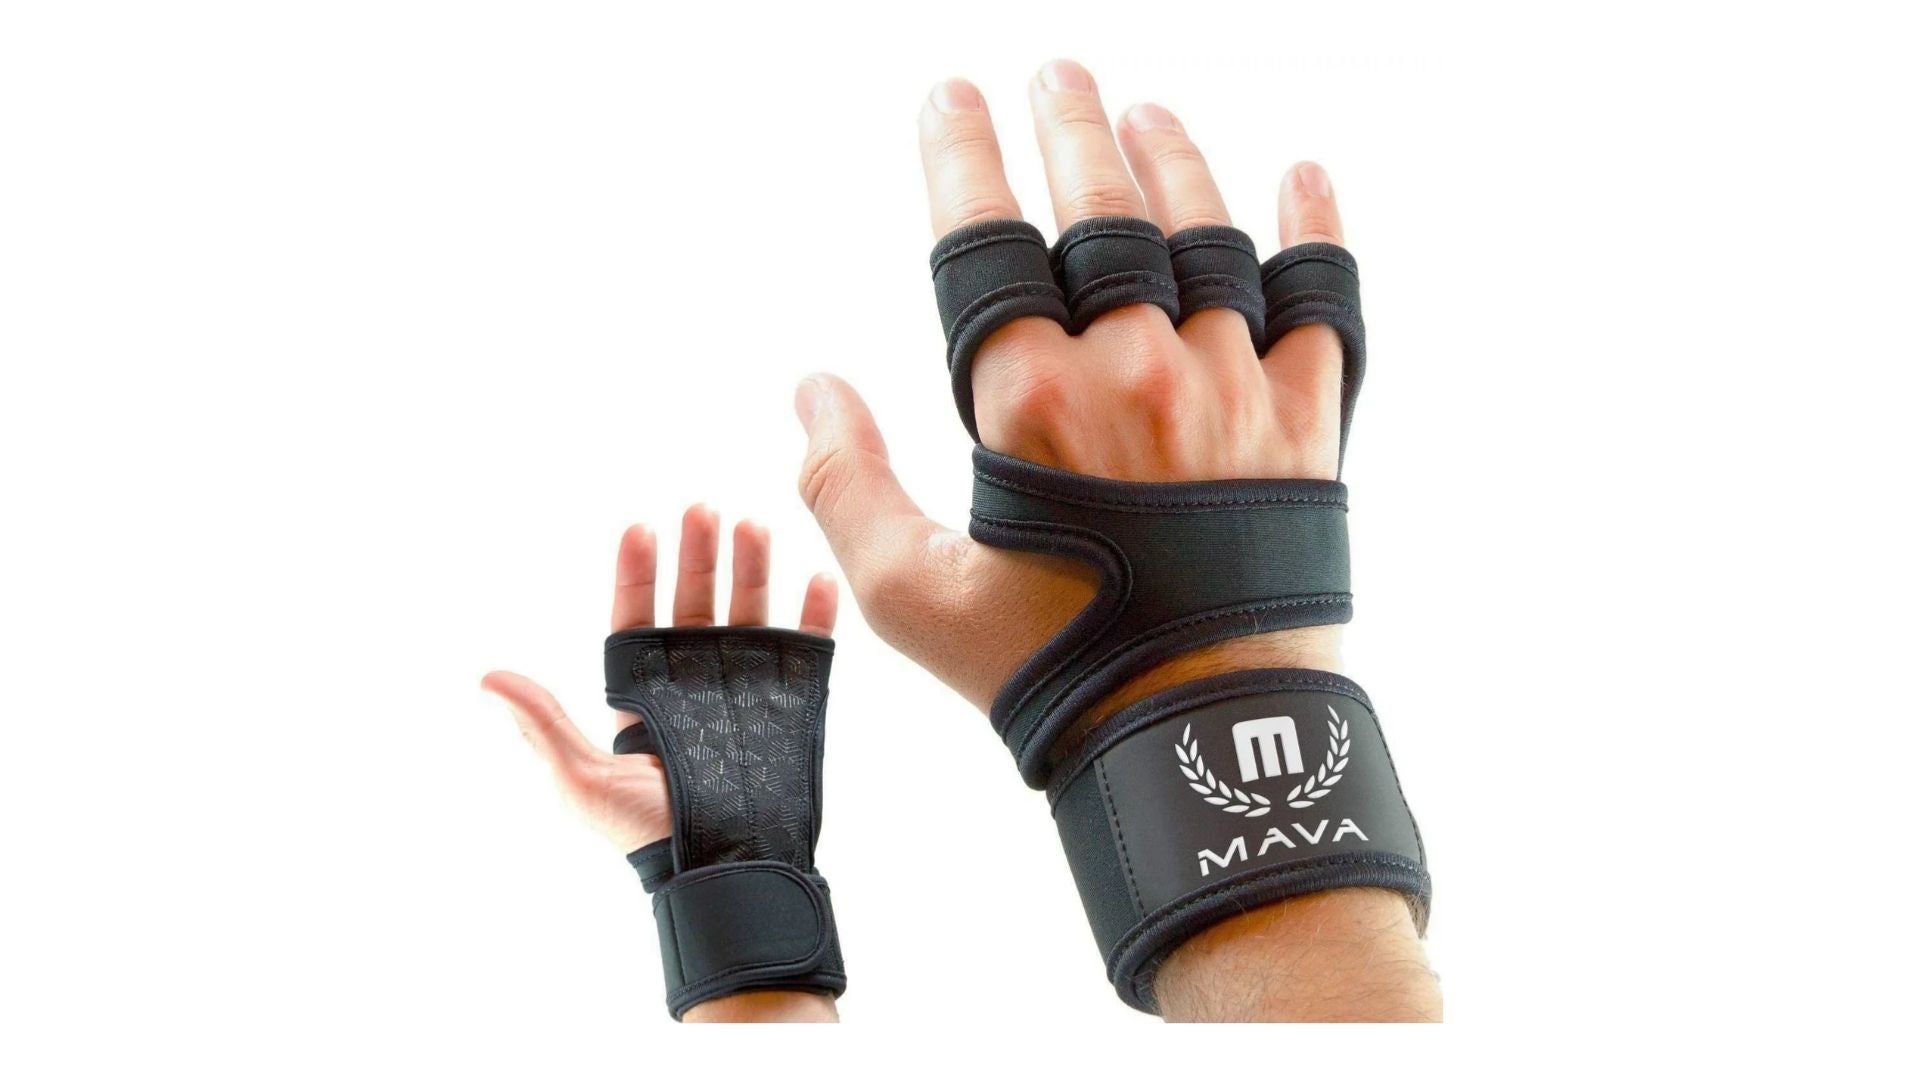 Wrist Wrap Support Gym Gloves For Weight Lifting/Sports/Training/Workout/Fitness 